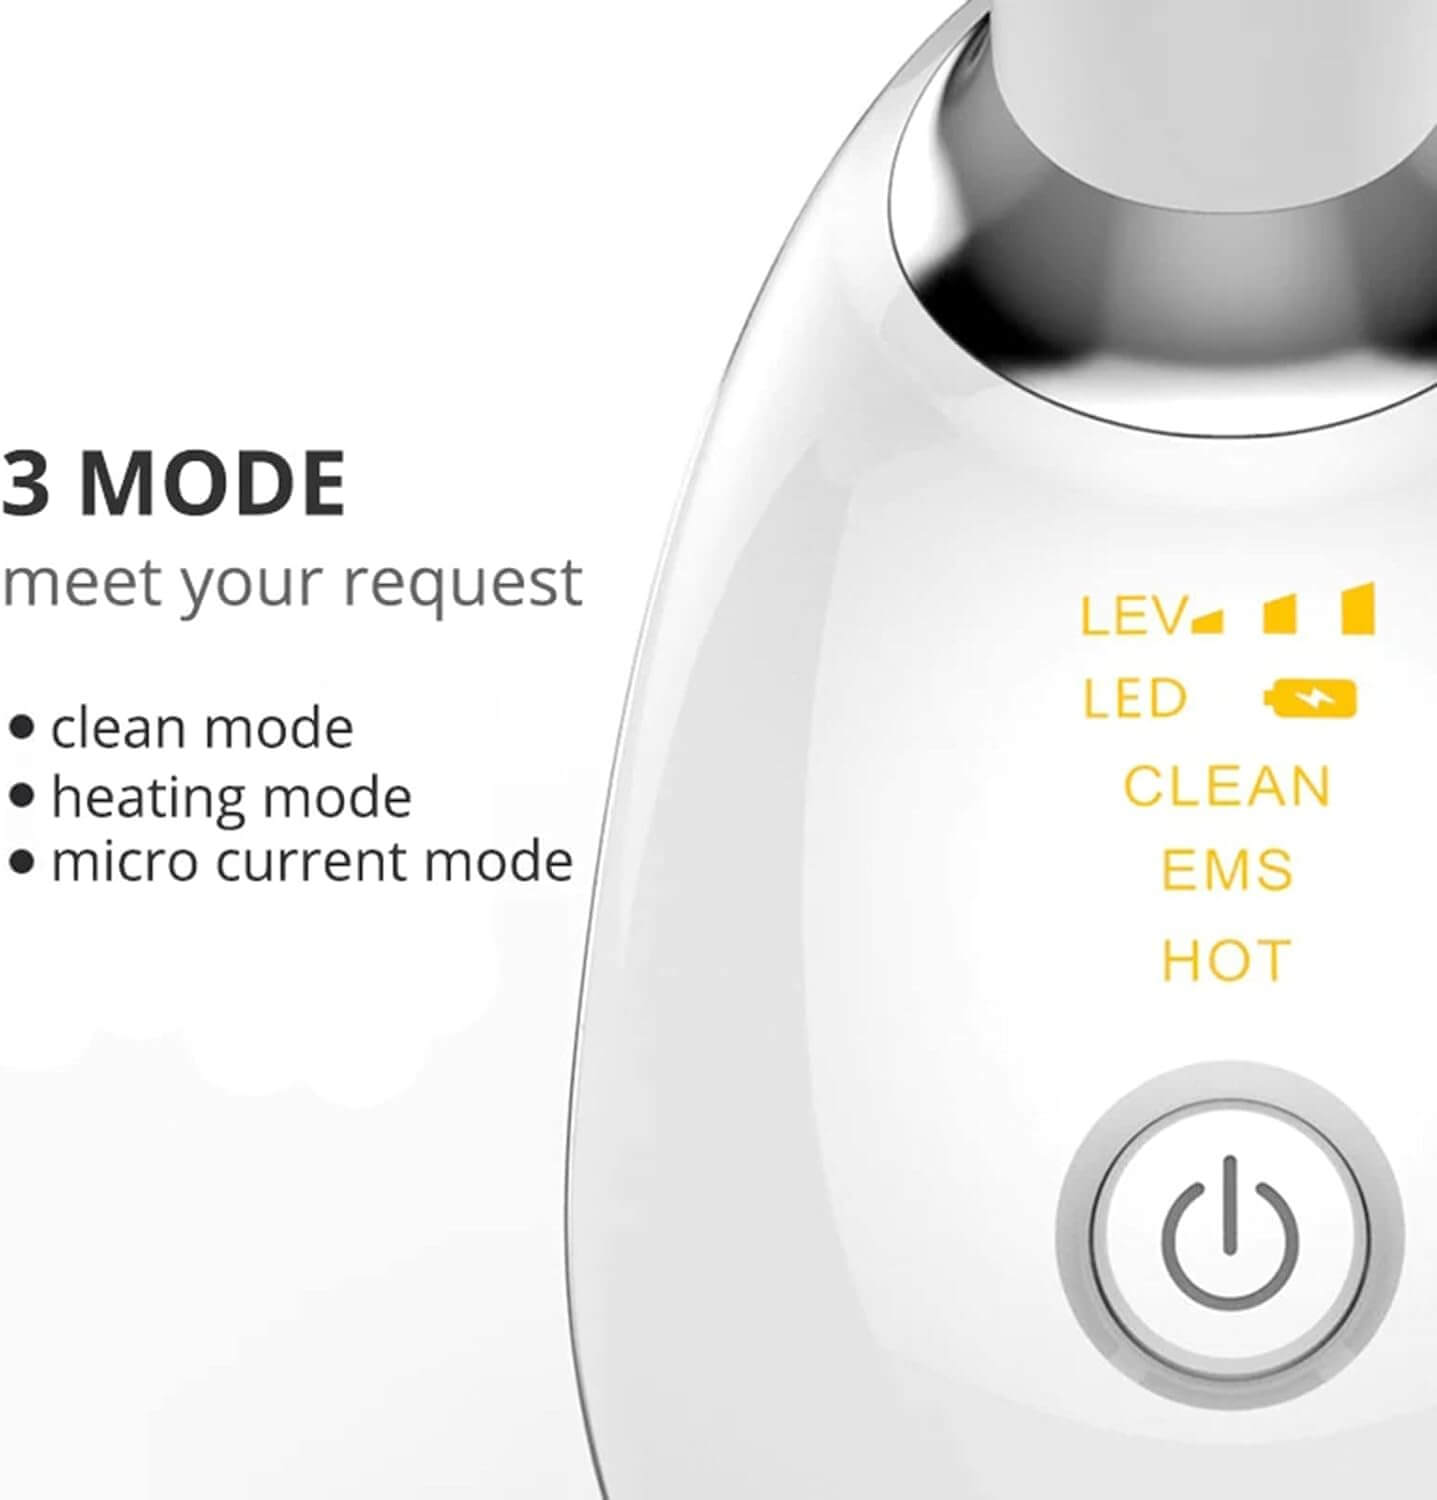 3 mode device. Clean mode, Heating mode, Micro current mode.